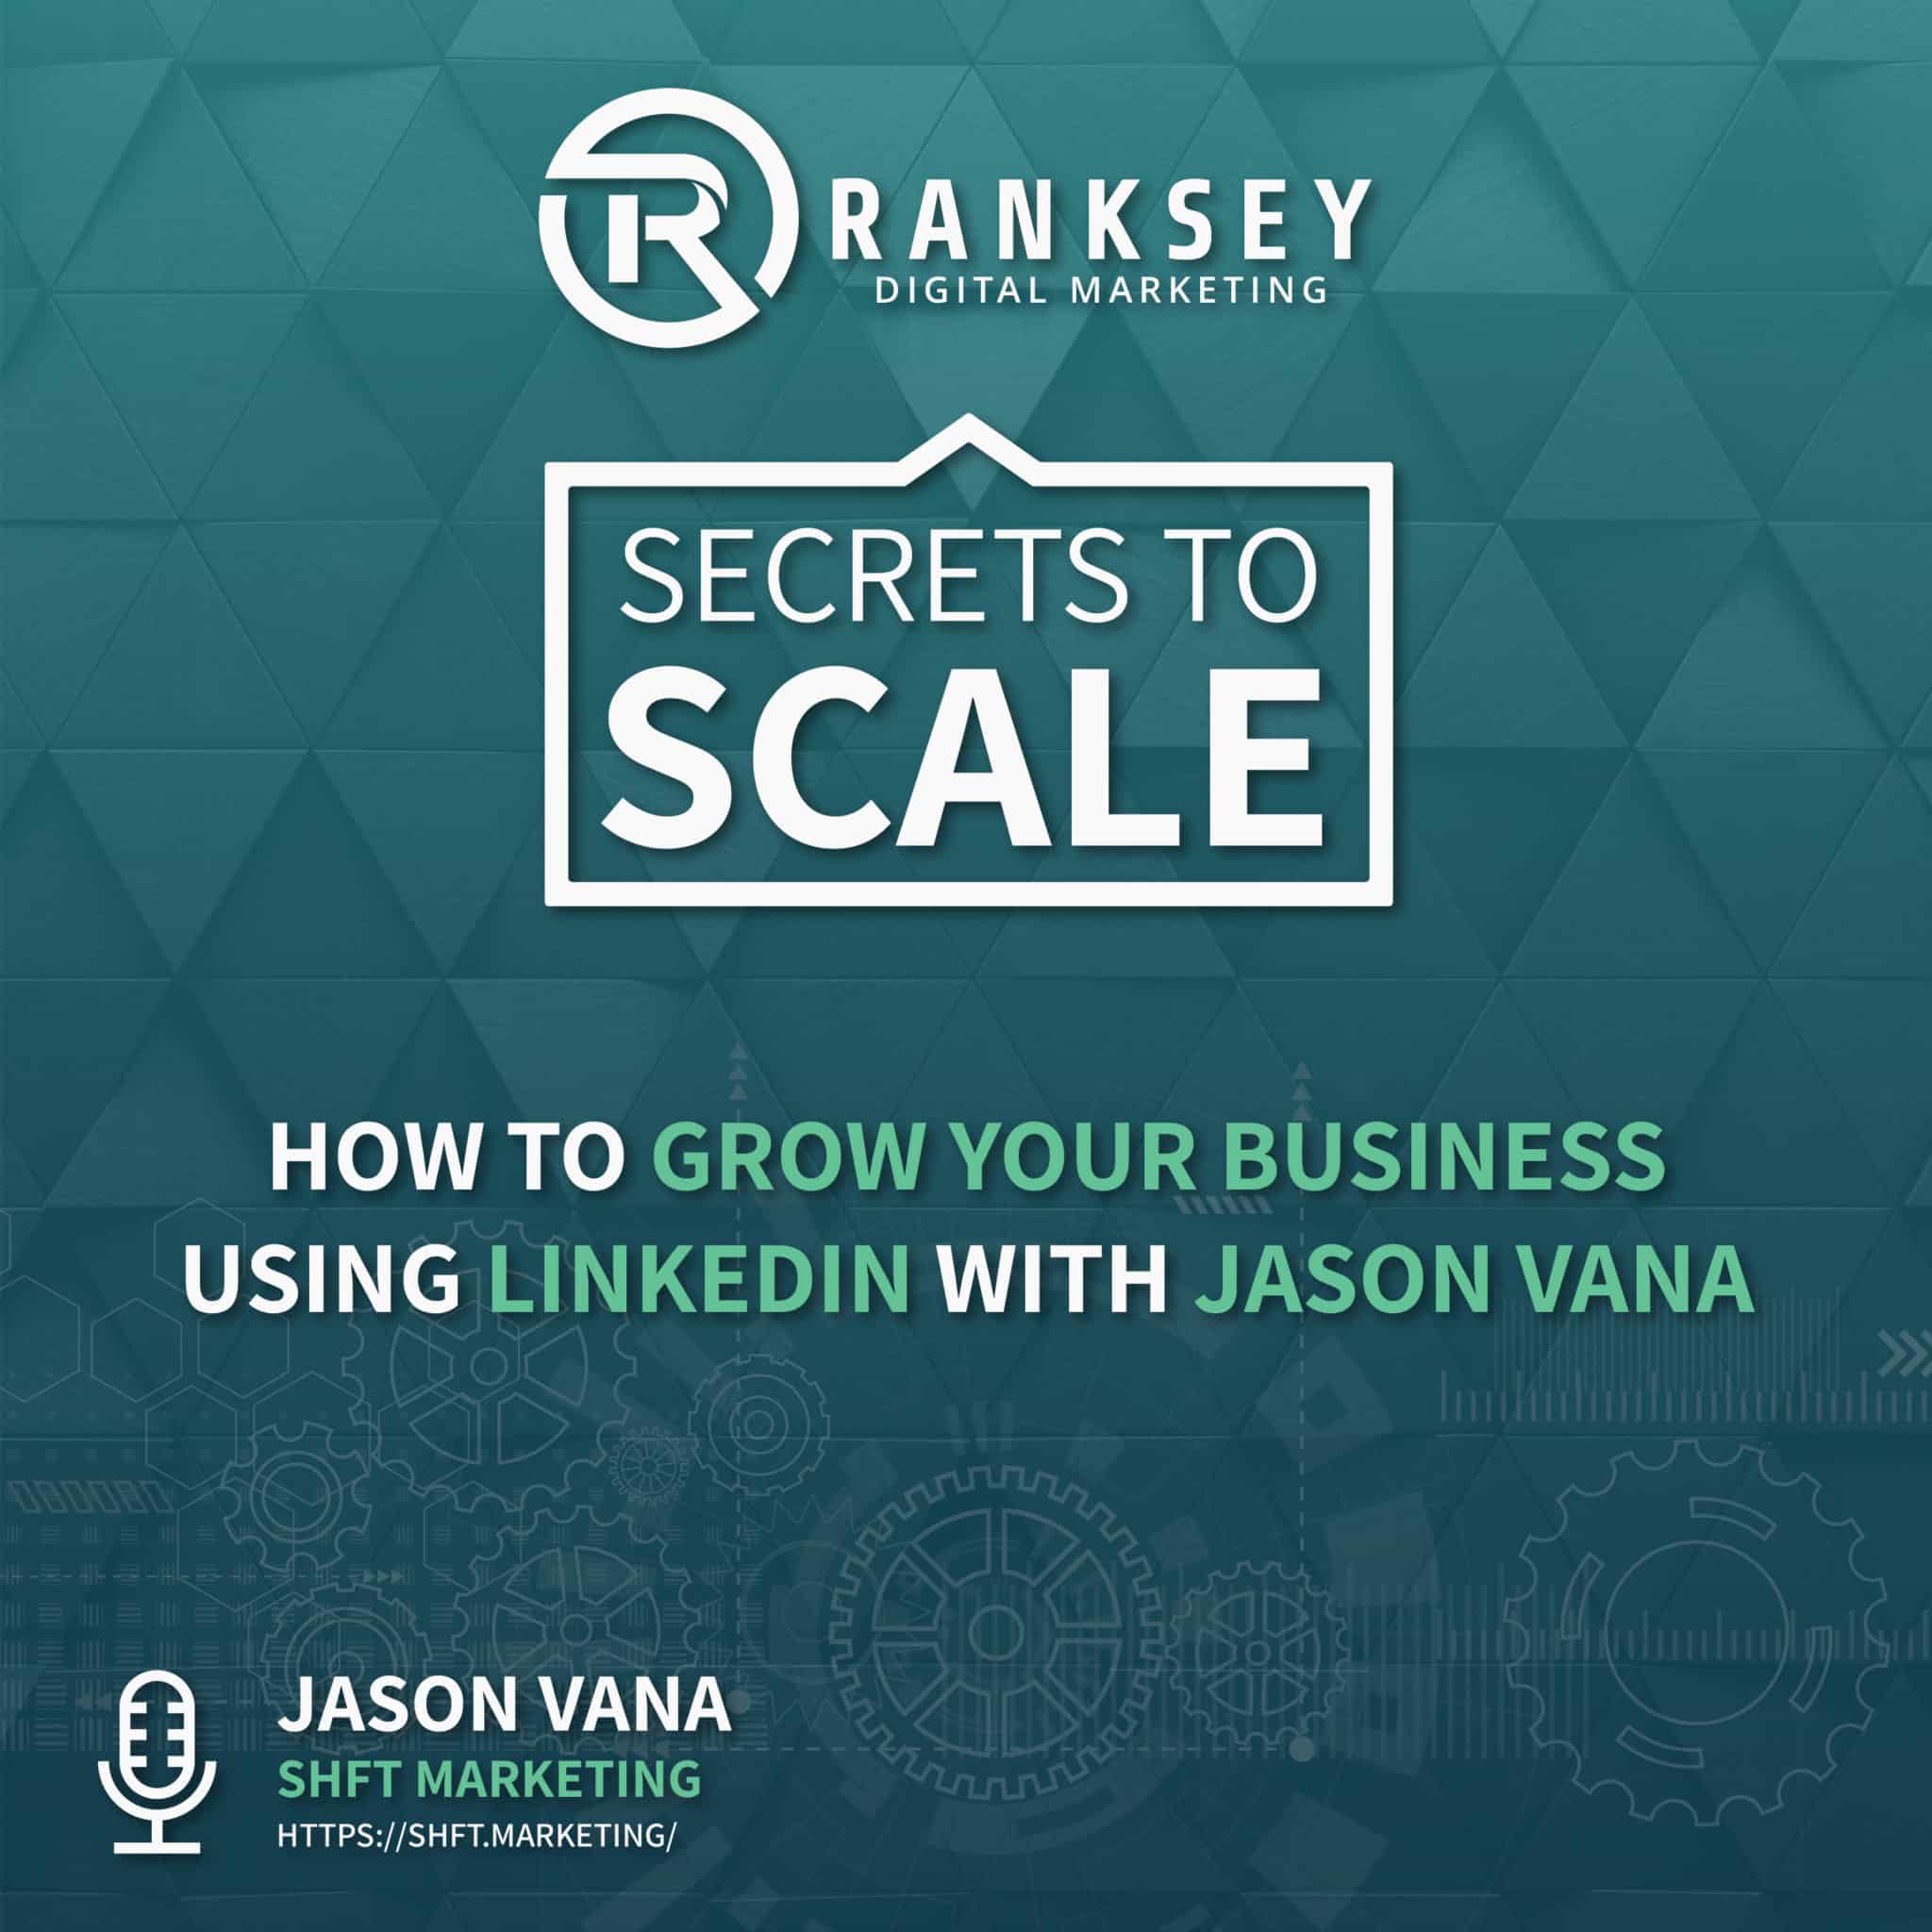 071 - How To Grow Your Business Using LinkedIn